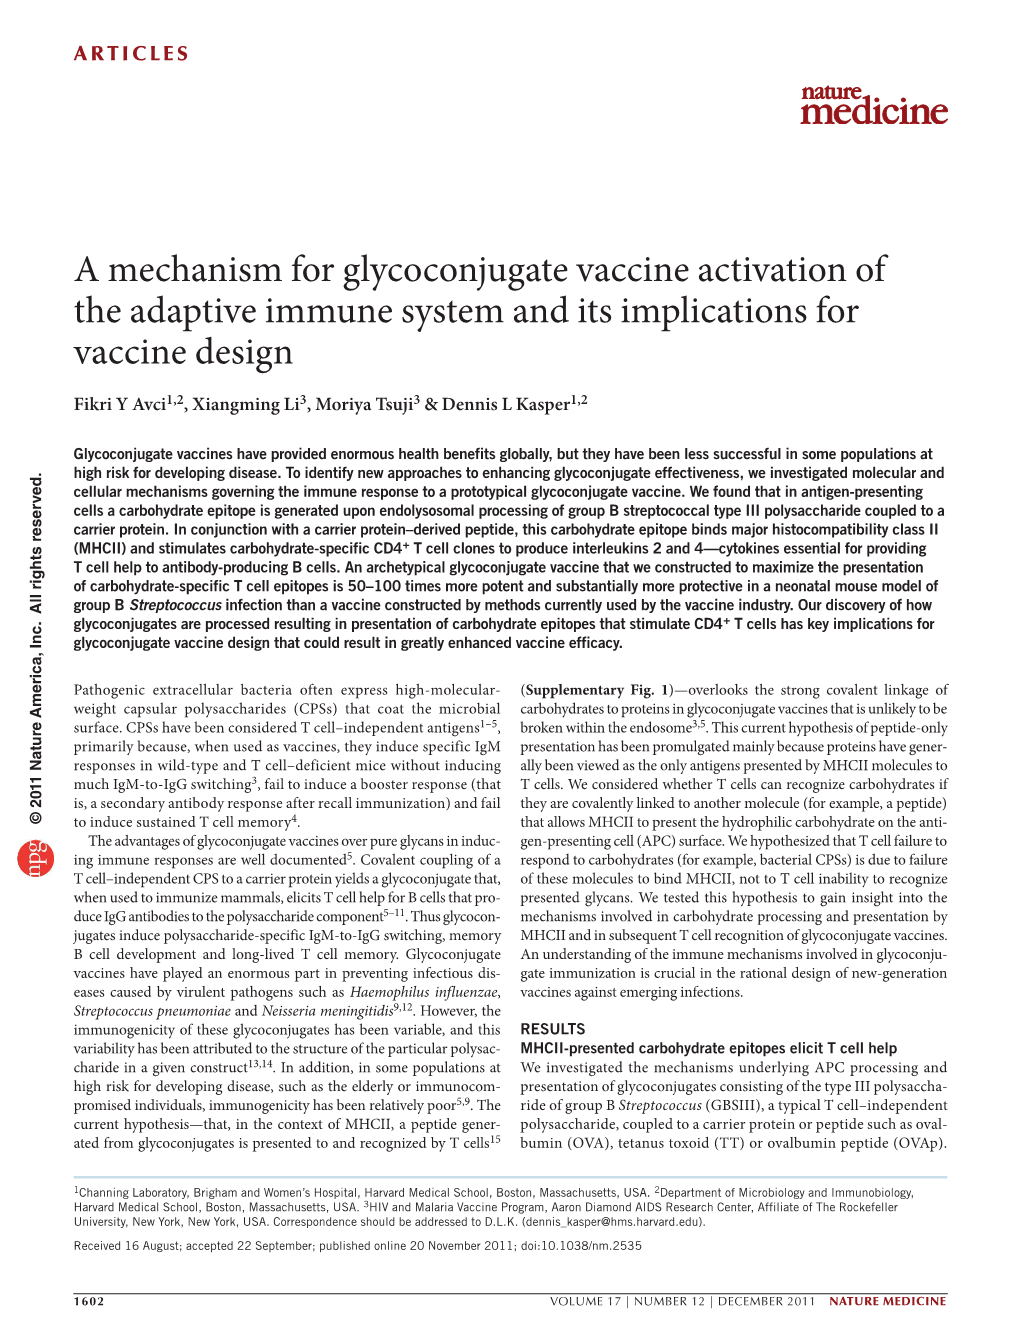 A Mechanism for Glycoconjugate Vaccine Activation of the Adaptive Immune System and Its Implications for Vaccine Design